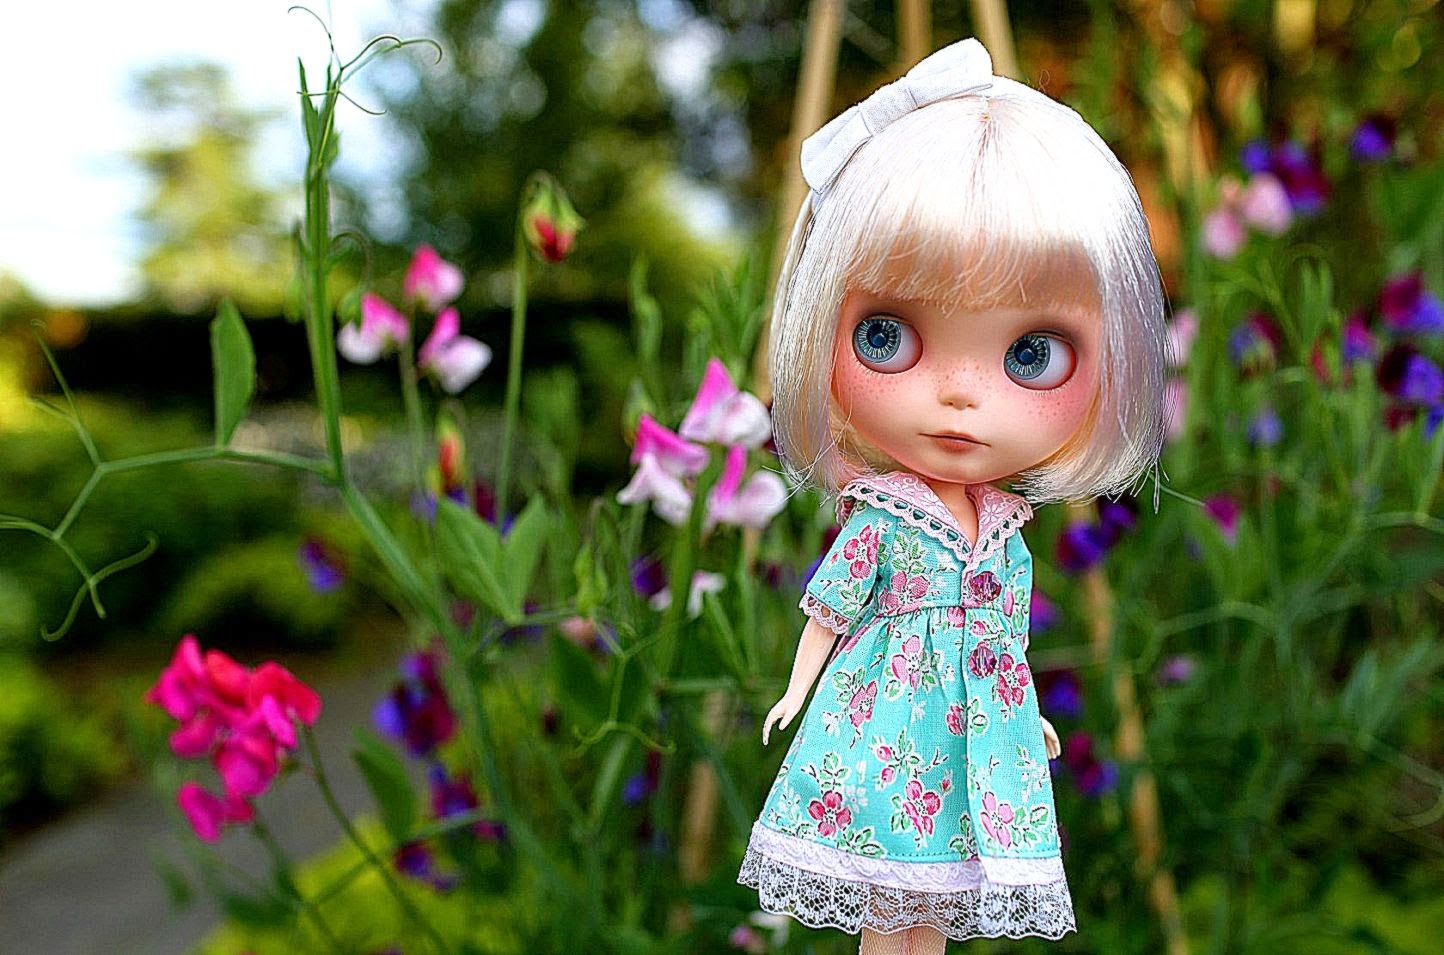 download cute animated dolls wallpapers gallery on anime doll wallpapers